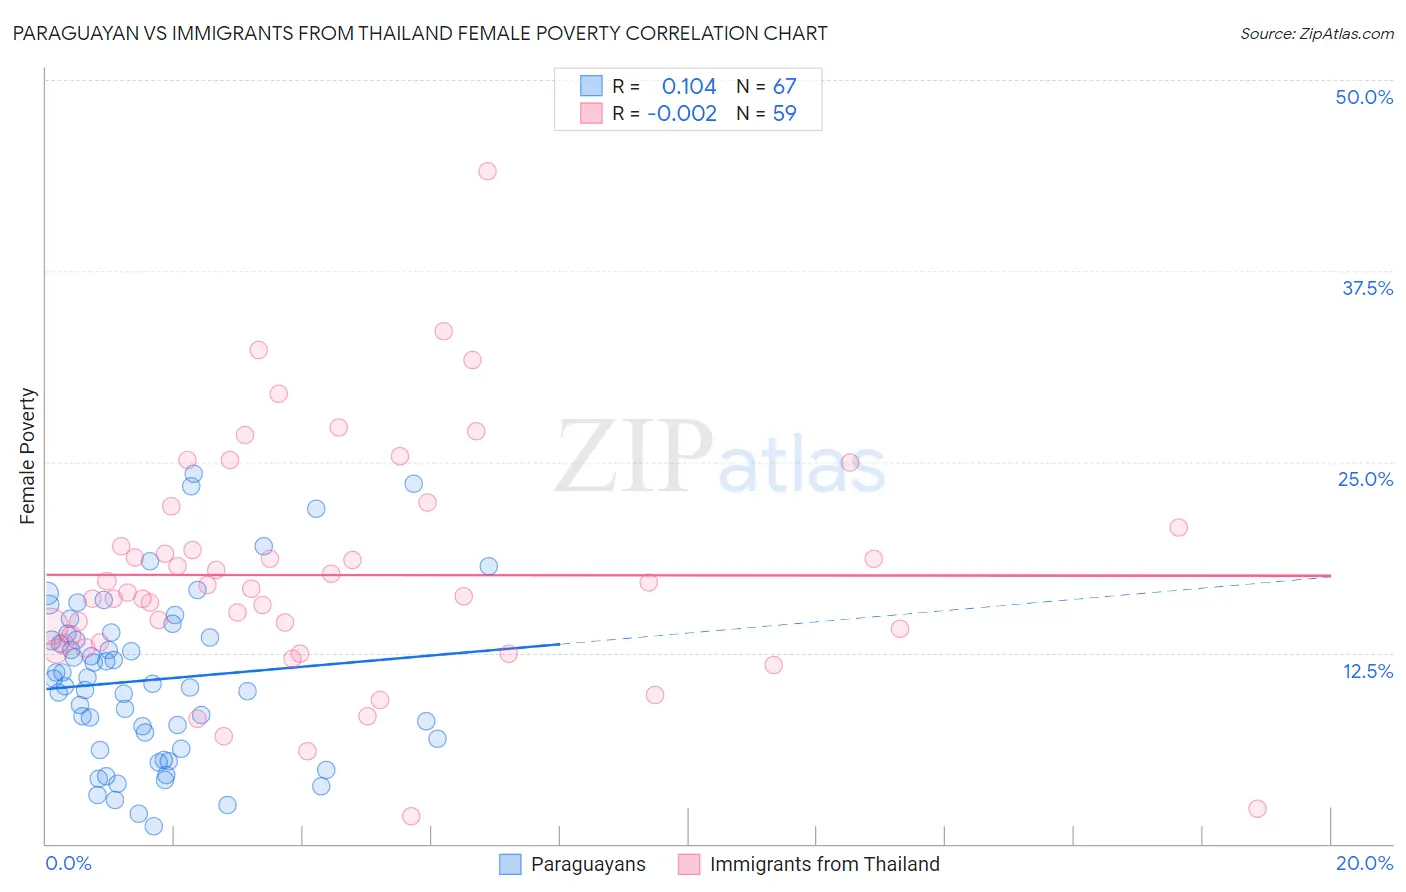 Paraguayan vs Immigrants from Thailand Female Poverty